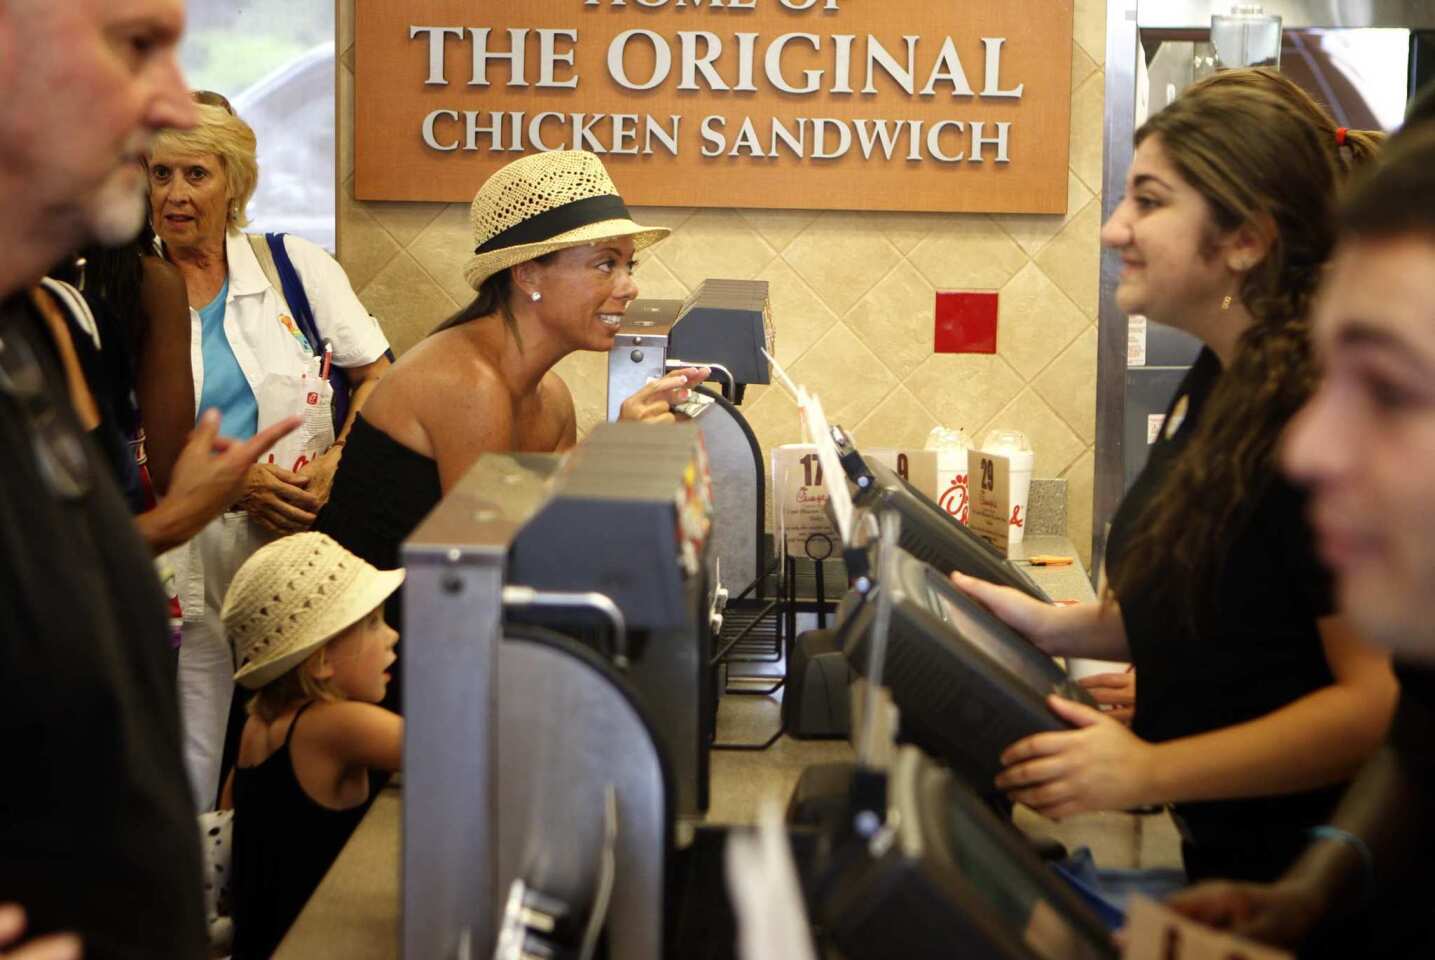 Tammy Weaver, center, places her order at the Chick-fil-A restaurant in Laguna Niguel. Supporters of the company whose executives made comments about gay marriage turned out in huge numbers here and across the nation. Weaver, who drove 20 miles from her home in Ladera Ranch to support the cause said, "I'm in favor of Biblical marriage."